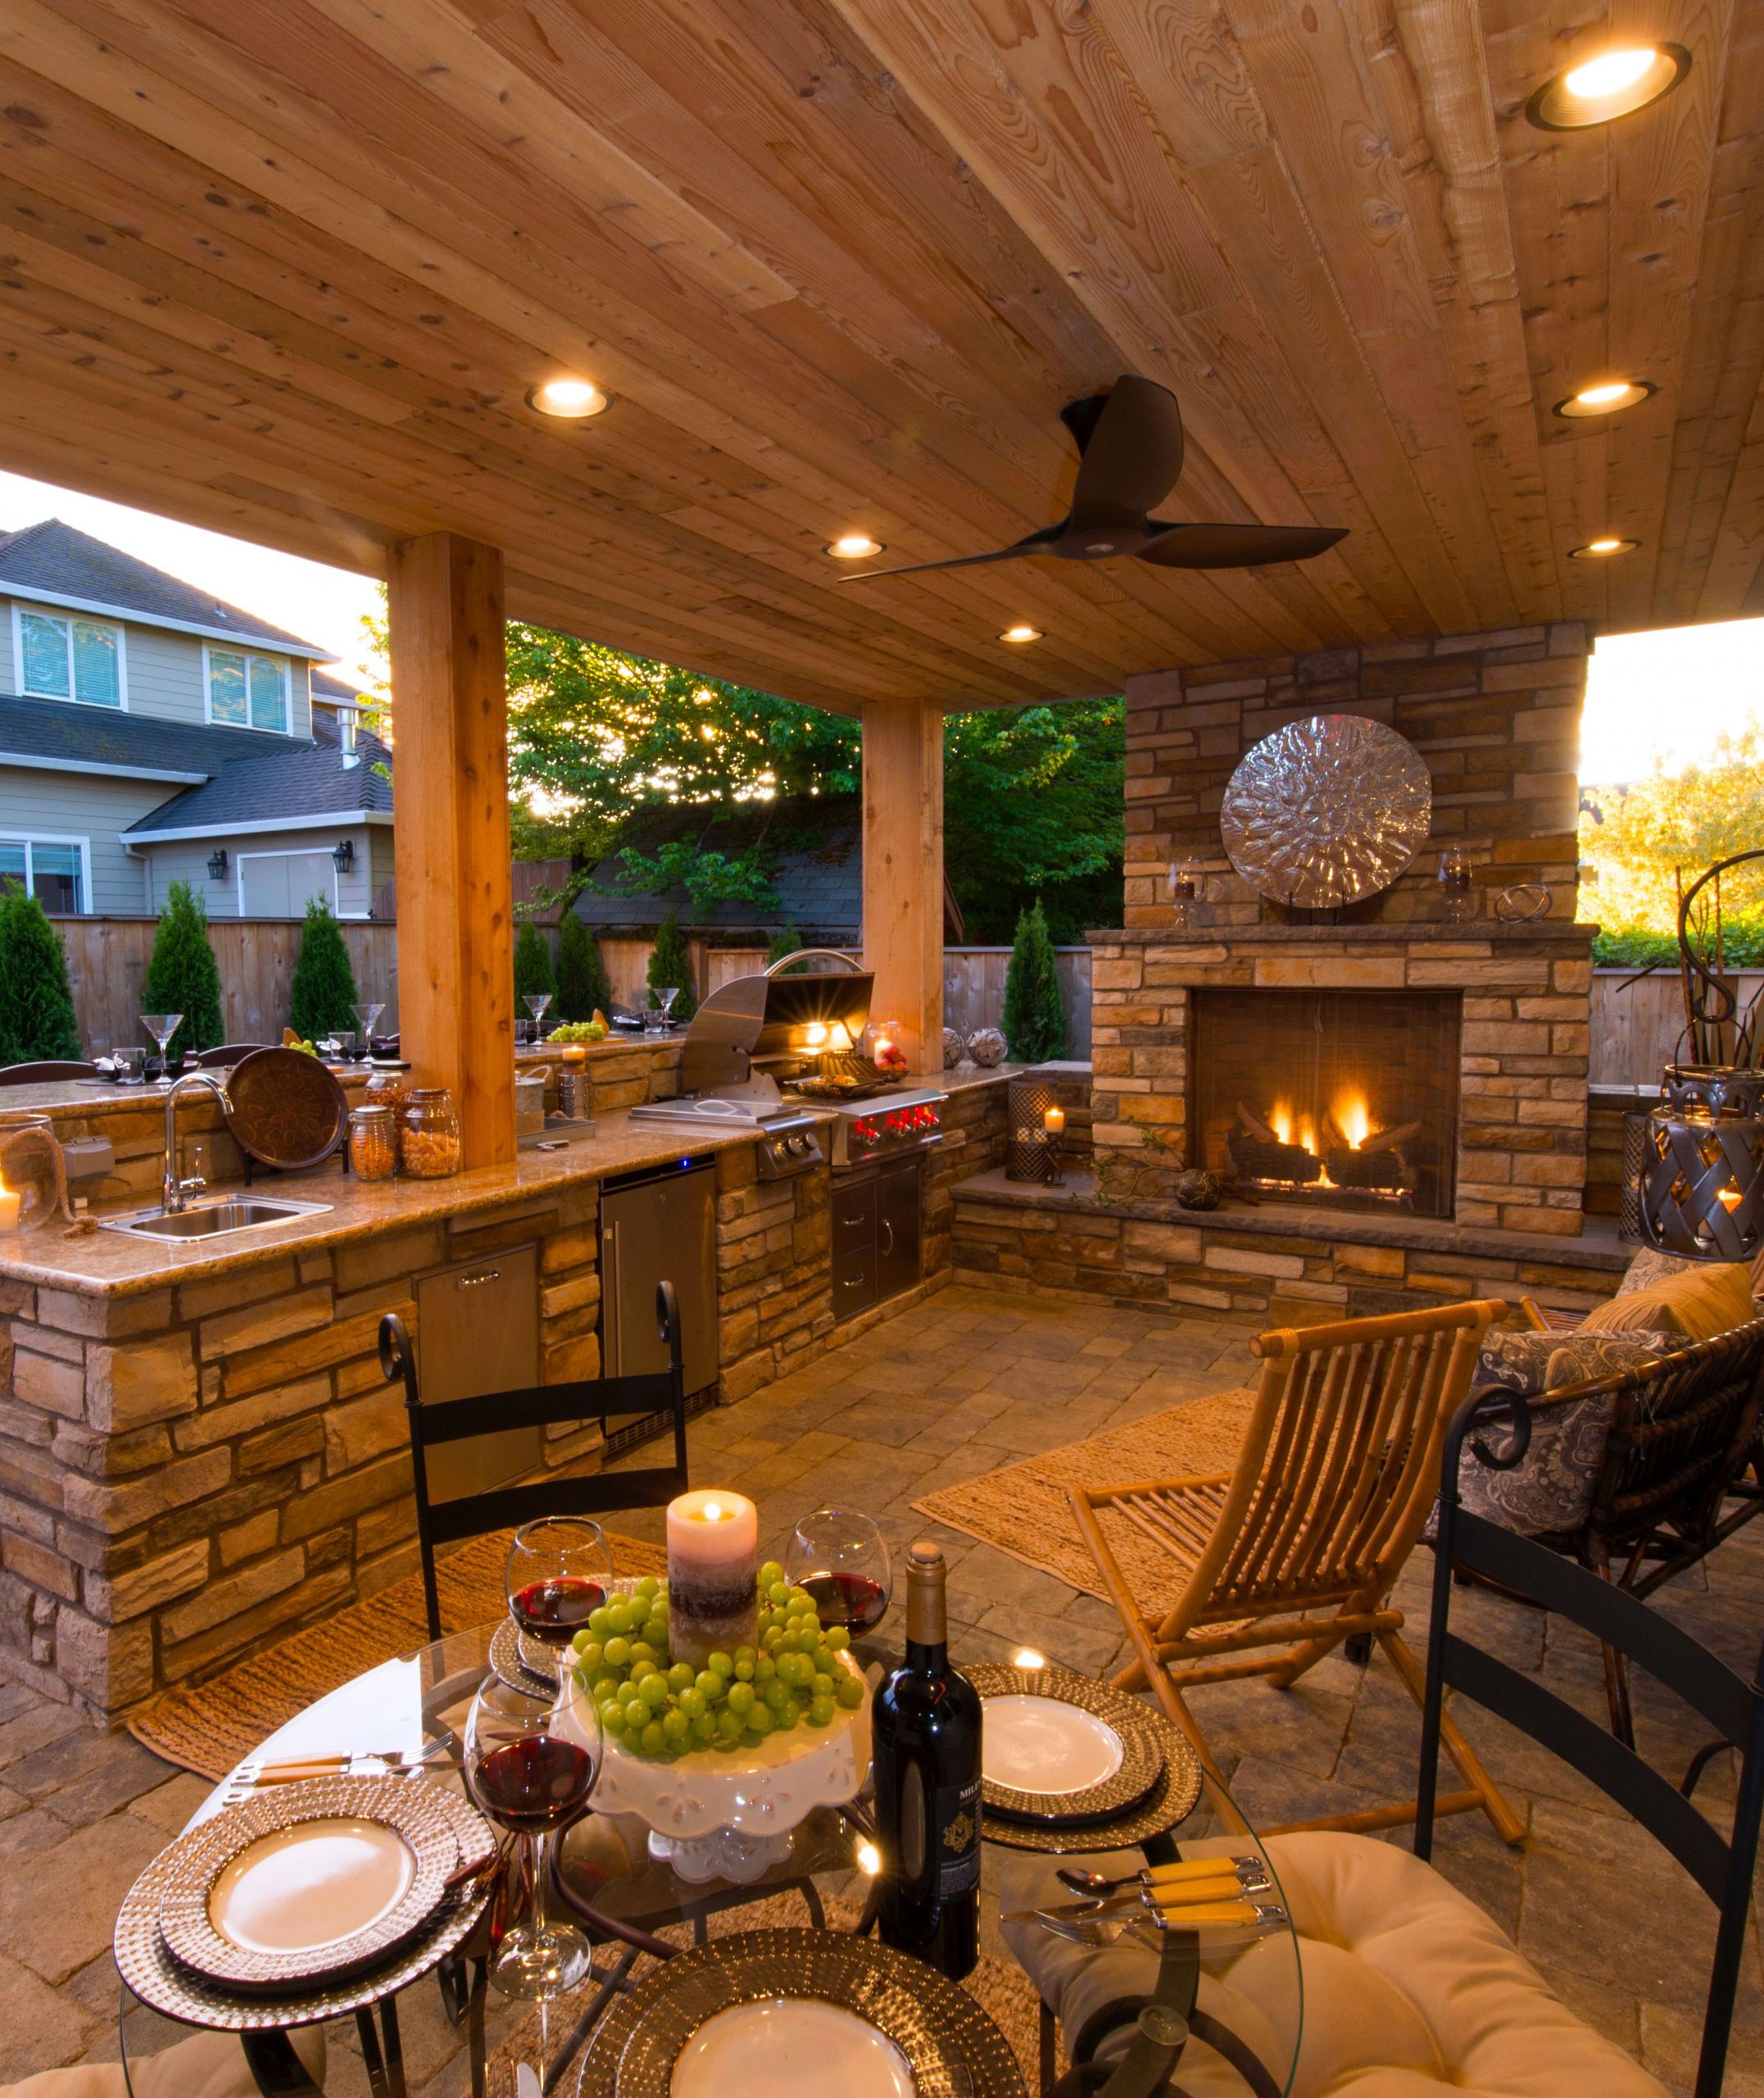 Outdoor Kitchen With Fireplace Designs
 Pin by Reta Mcrae on OUTDOOR SPACES